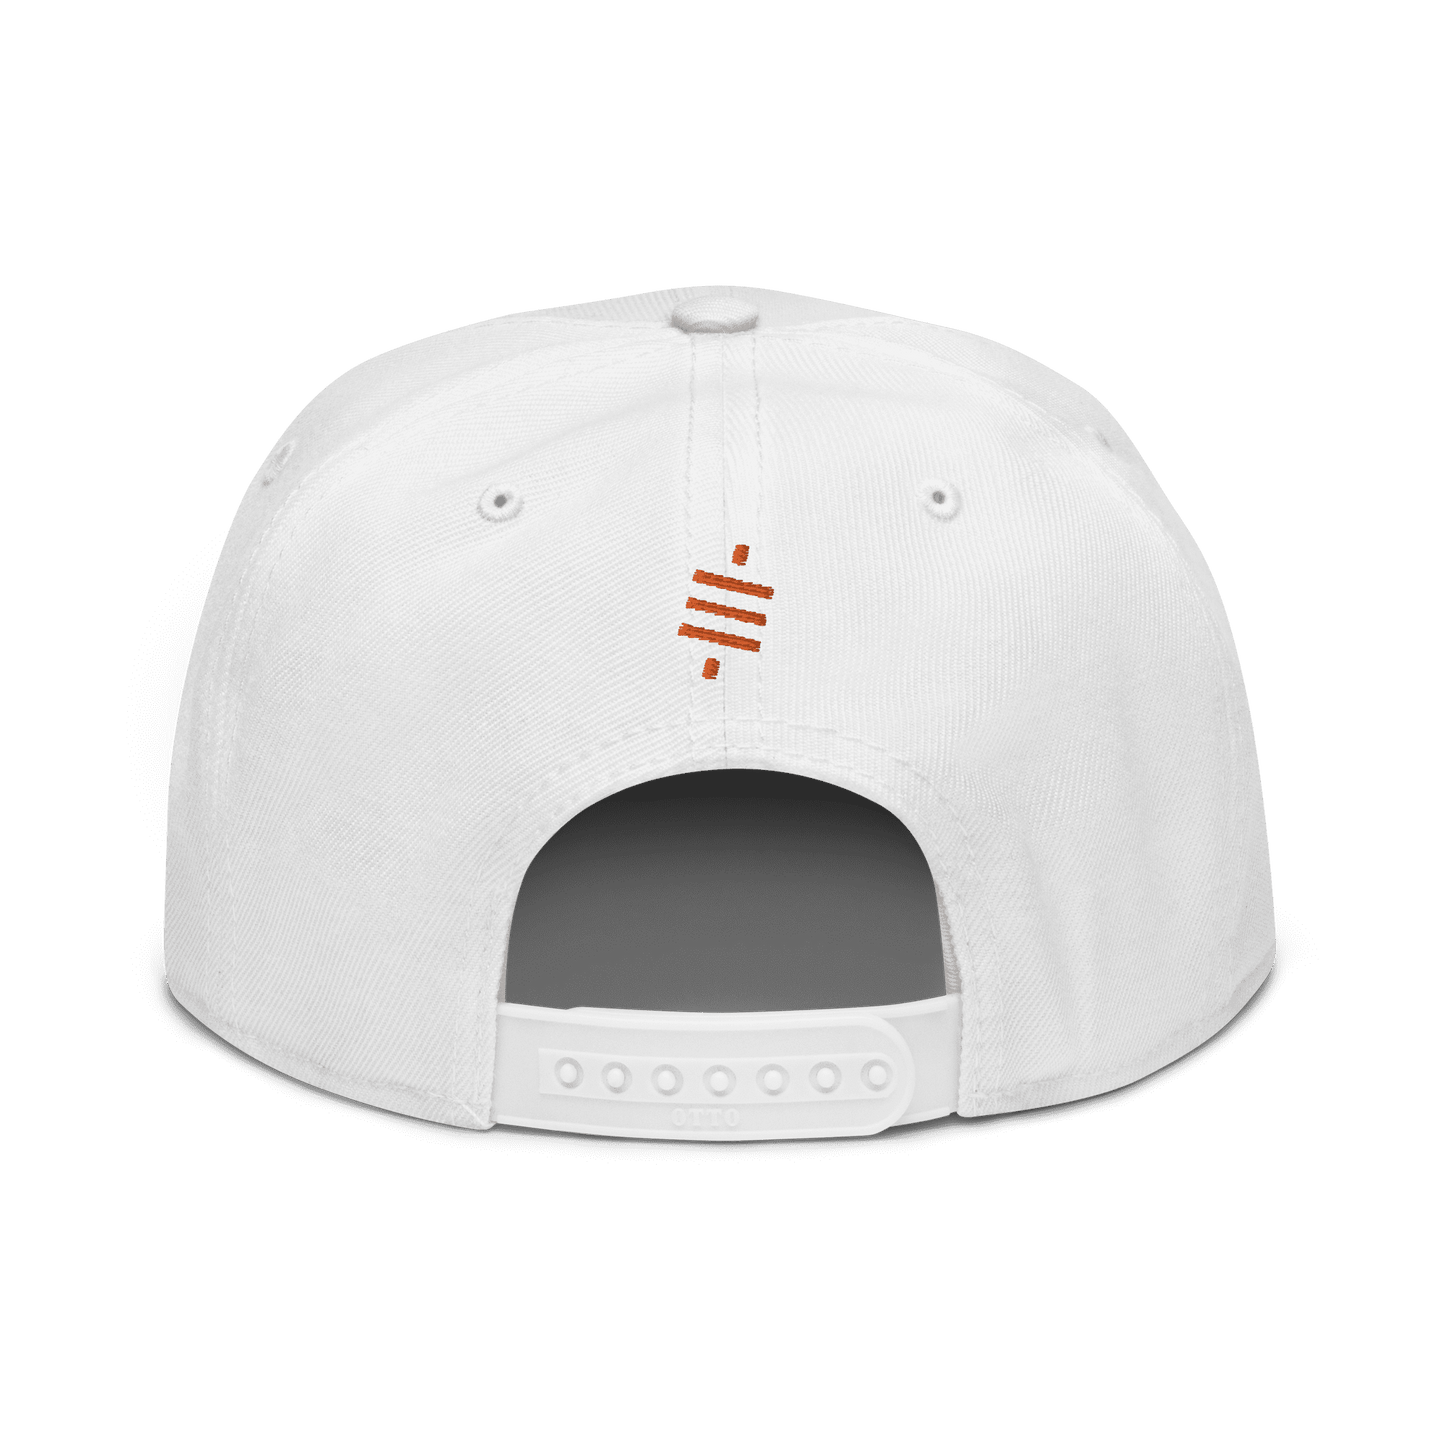 Back view of a white bitcoin snapback hat.